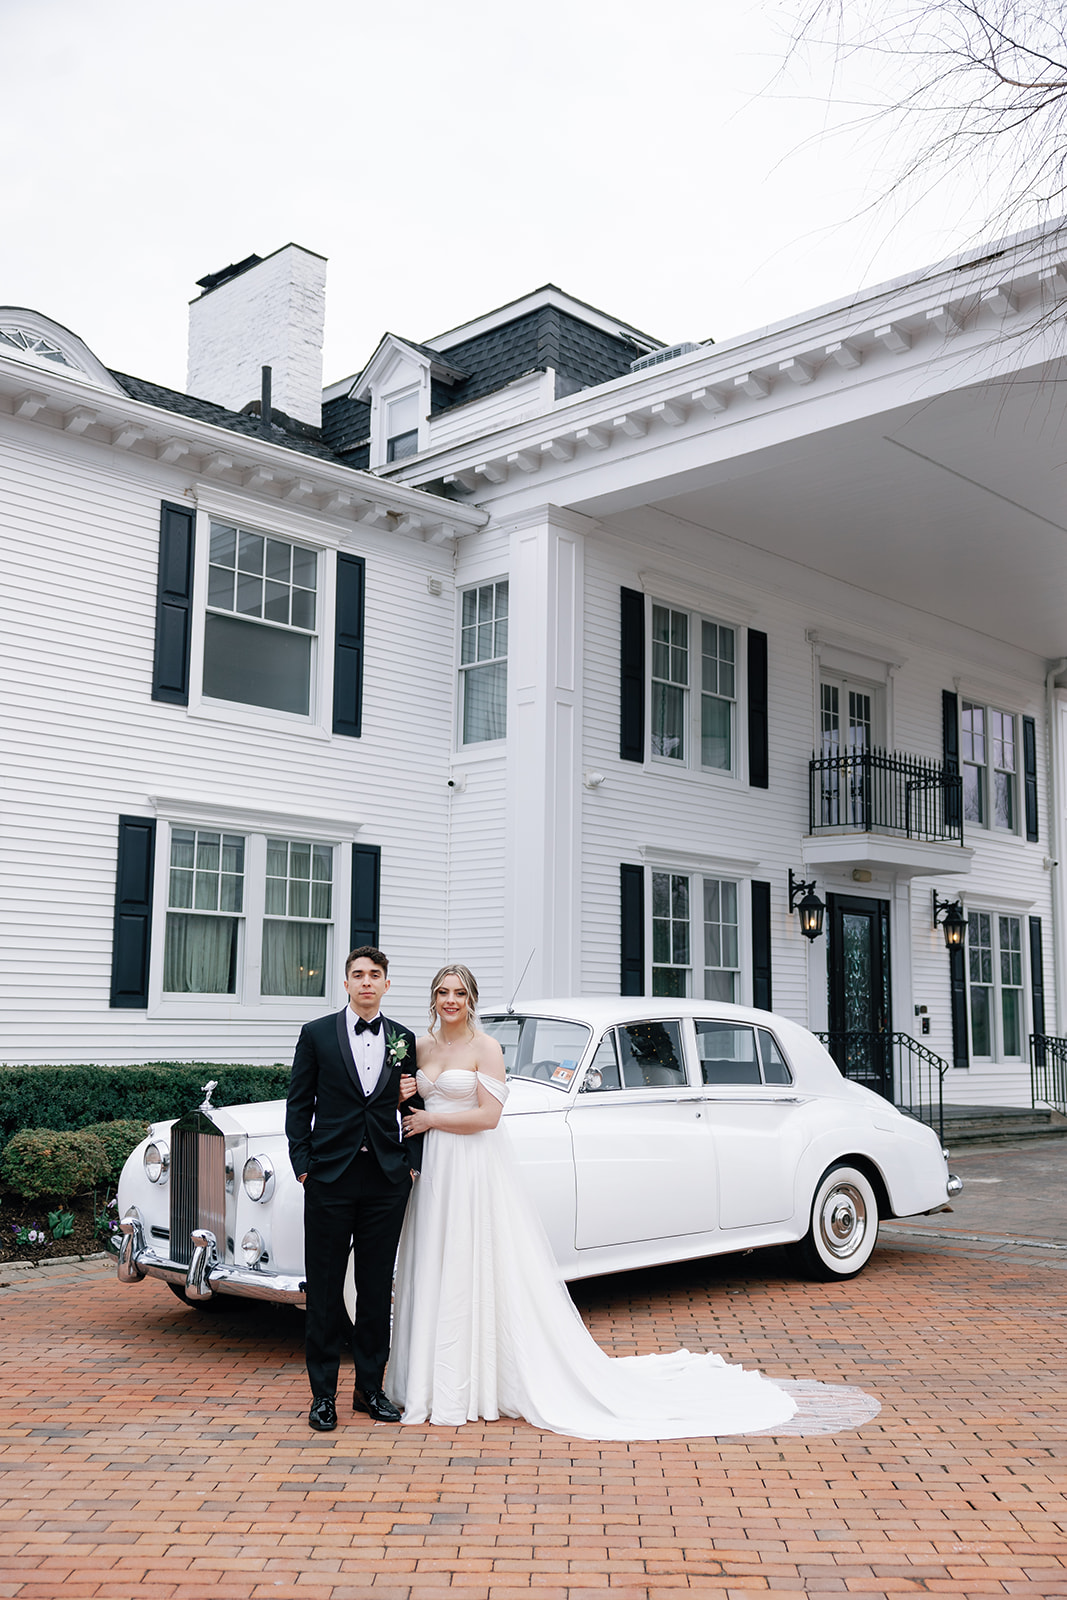 Newlyweds stand in front of a vintage car parked outside one of the New Jersey Garden Wedding Venues